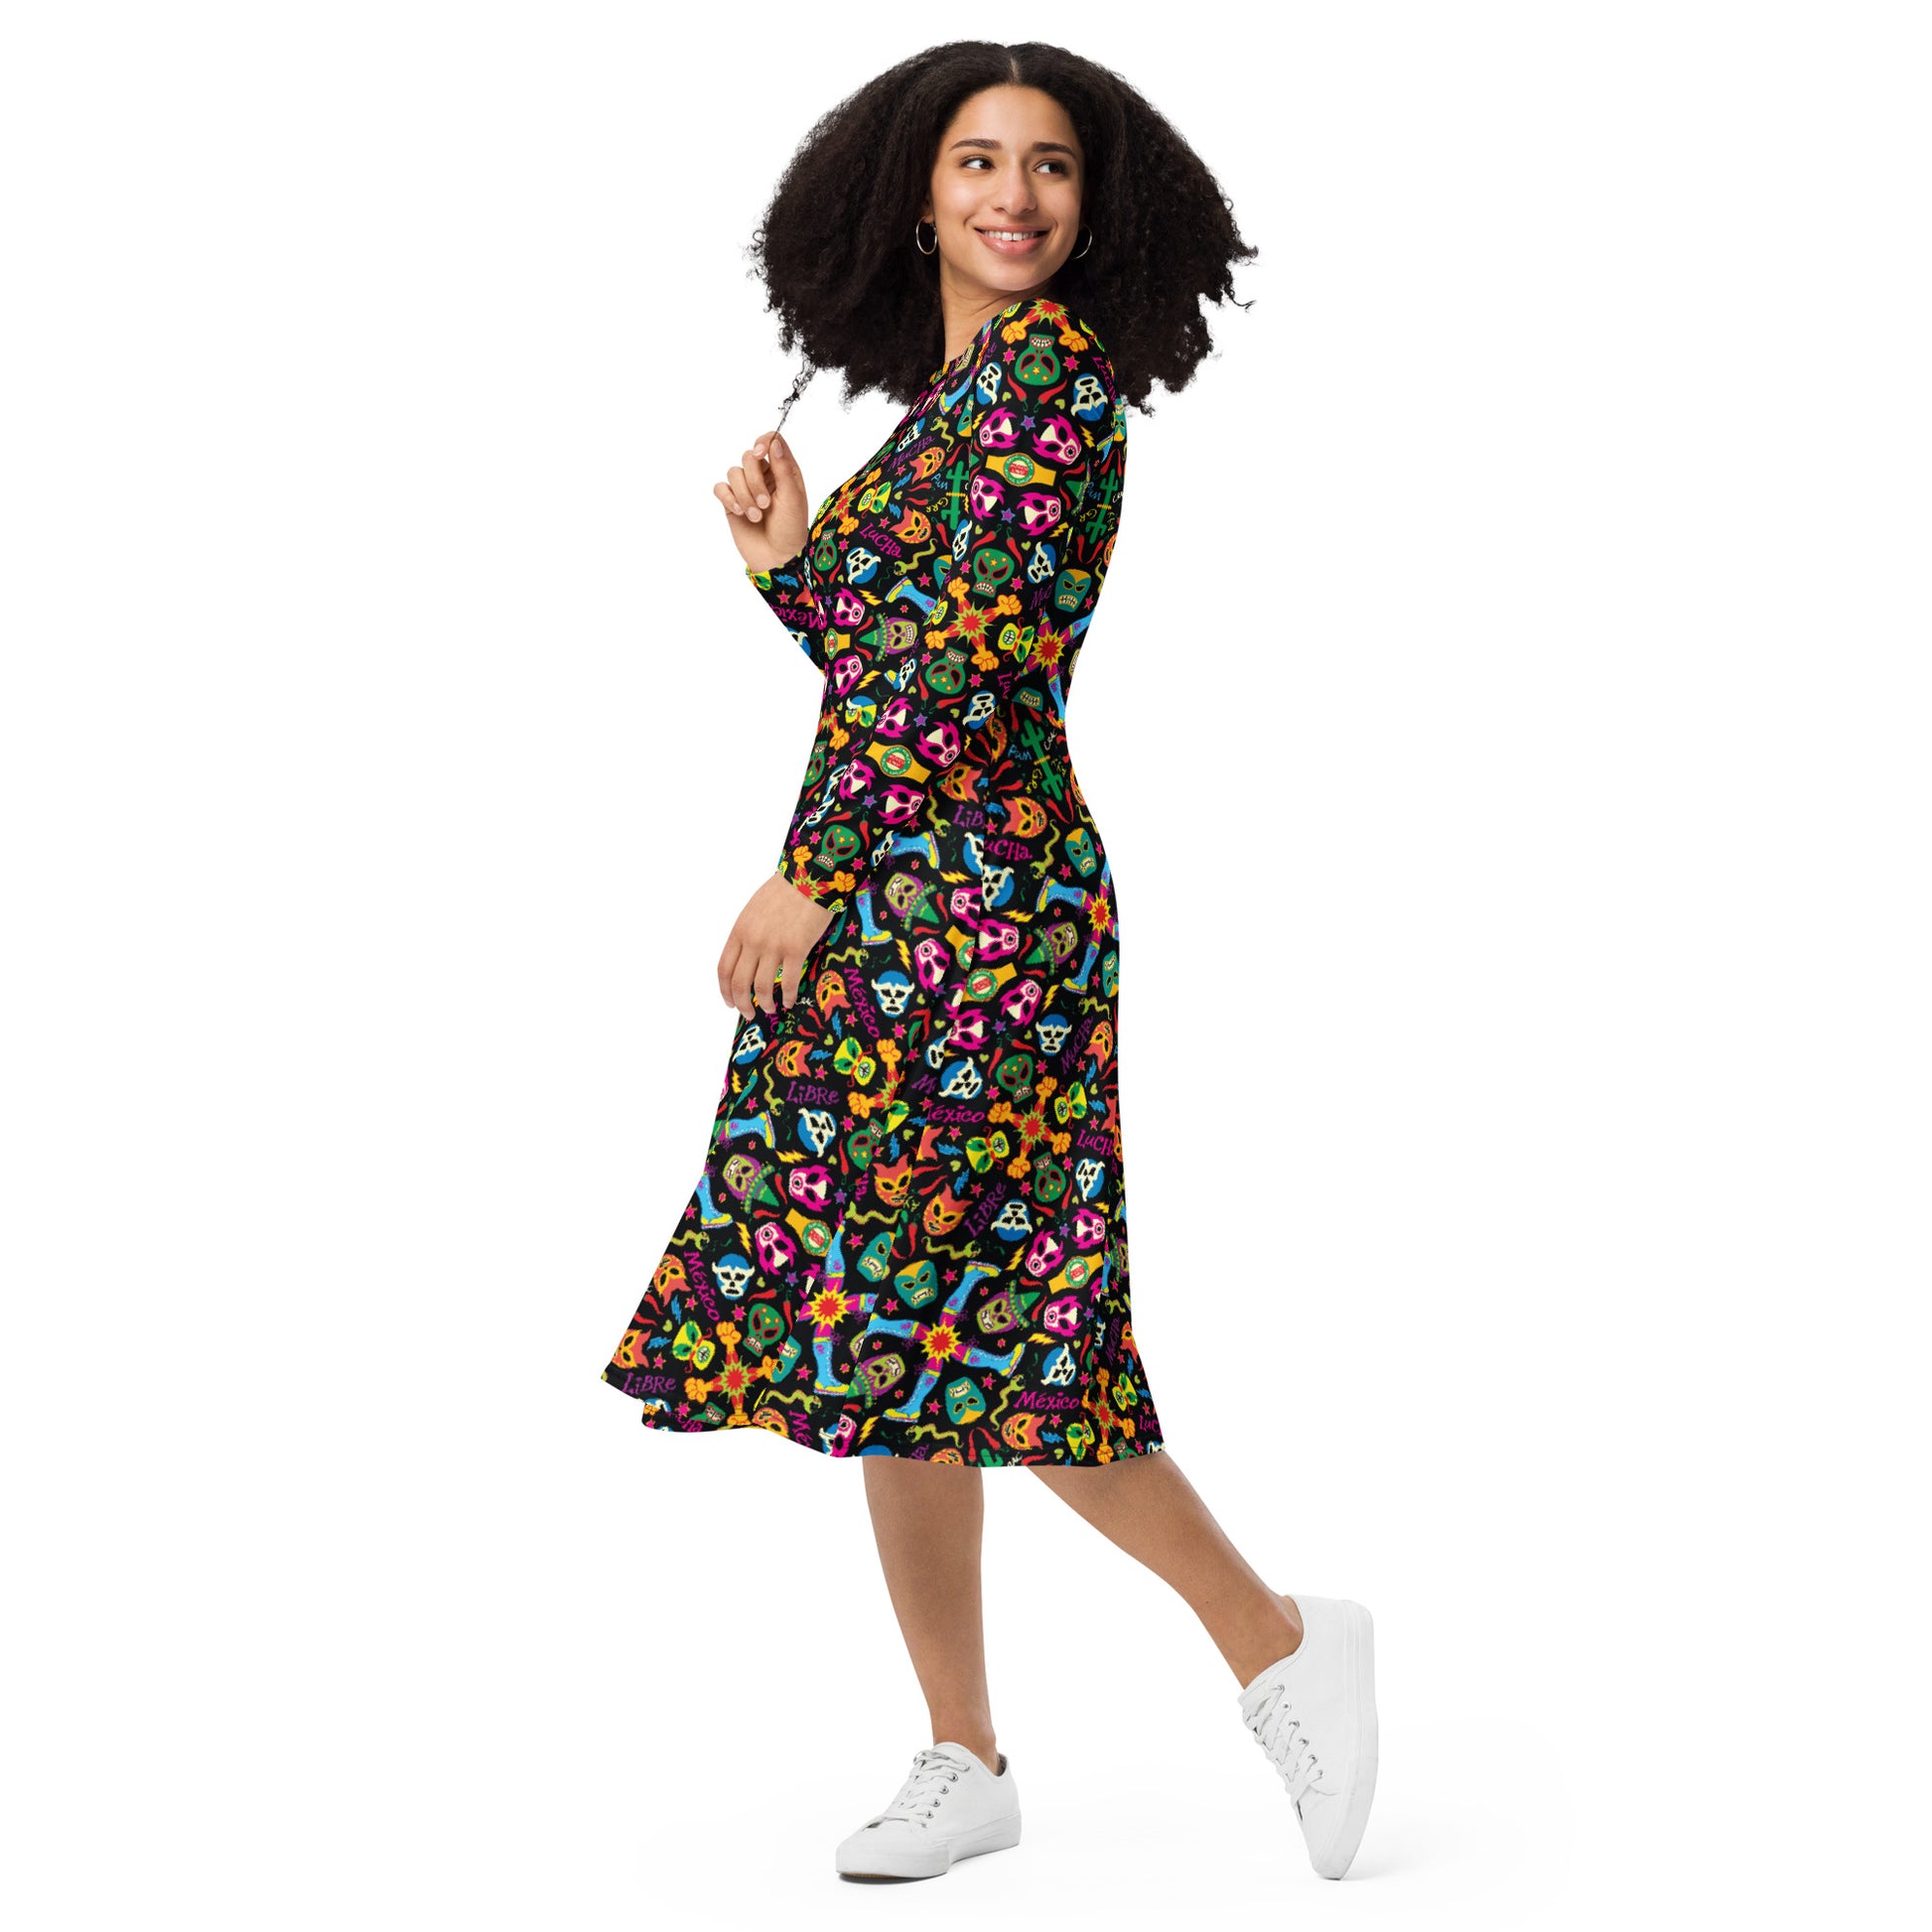 Mexican wrestling colorful party All-over print long sleeve midi dress. Side view